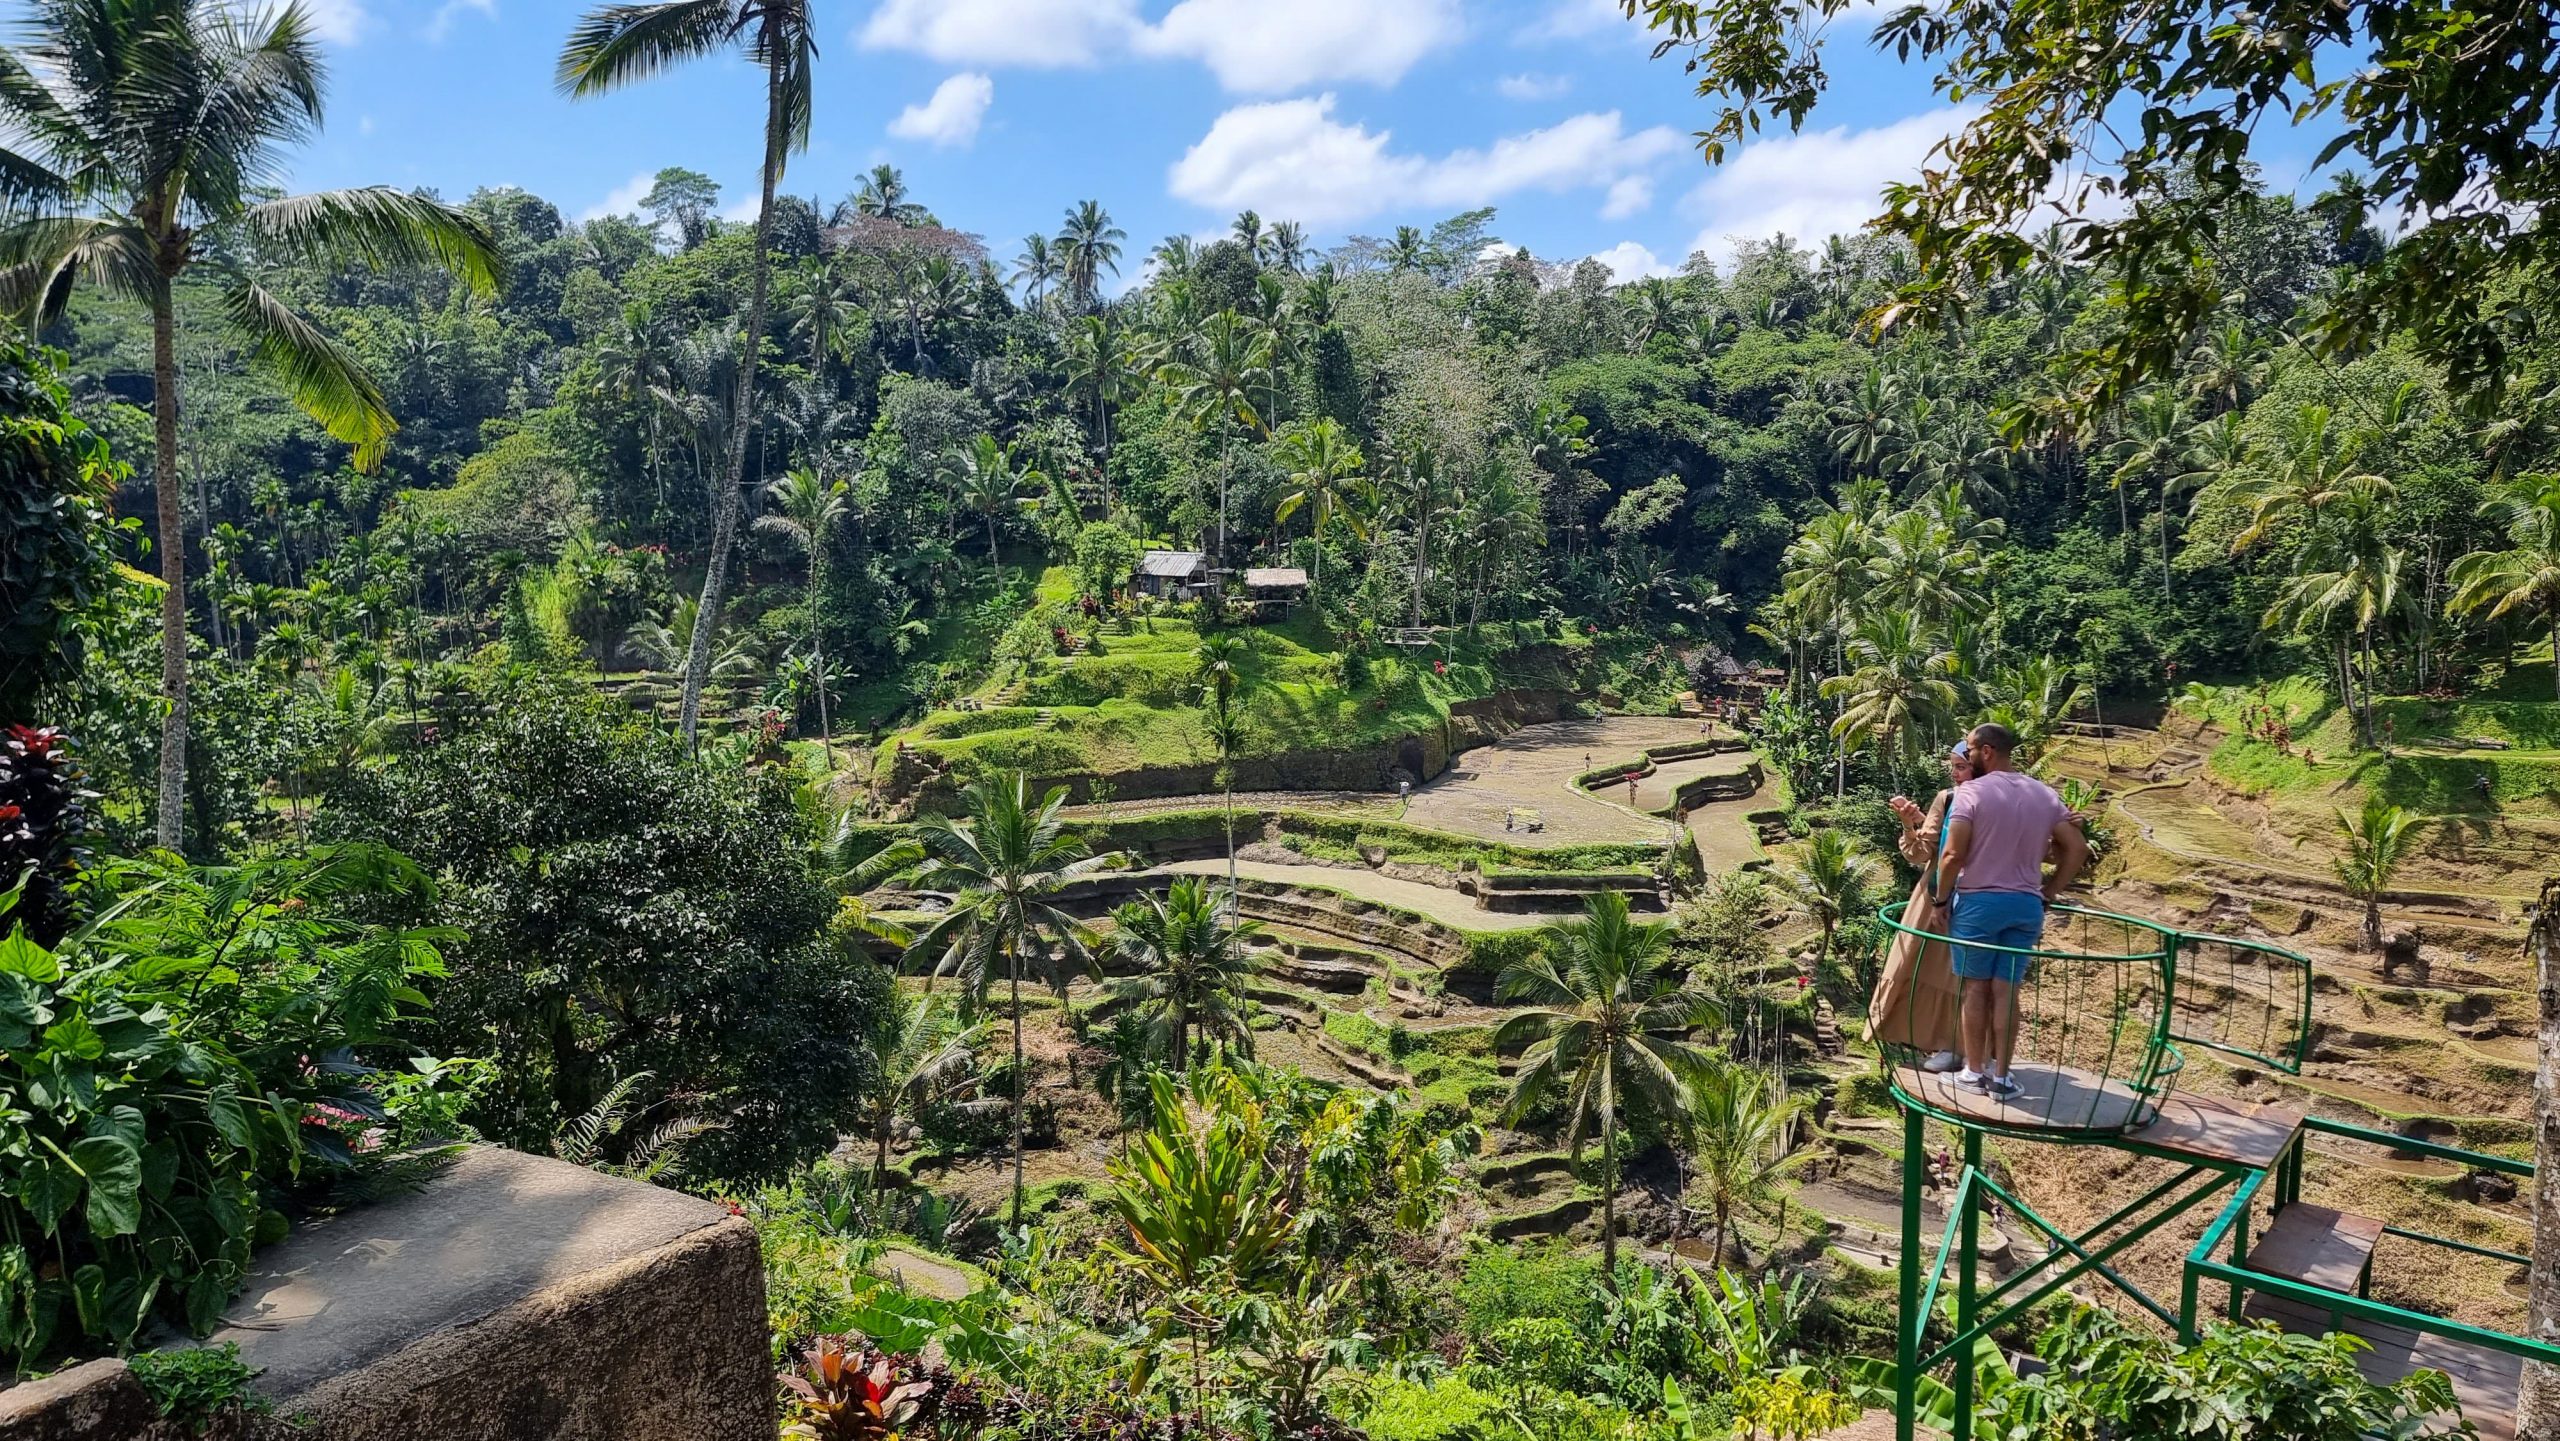 view point within the Bali swings Abian Rice Fields